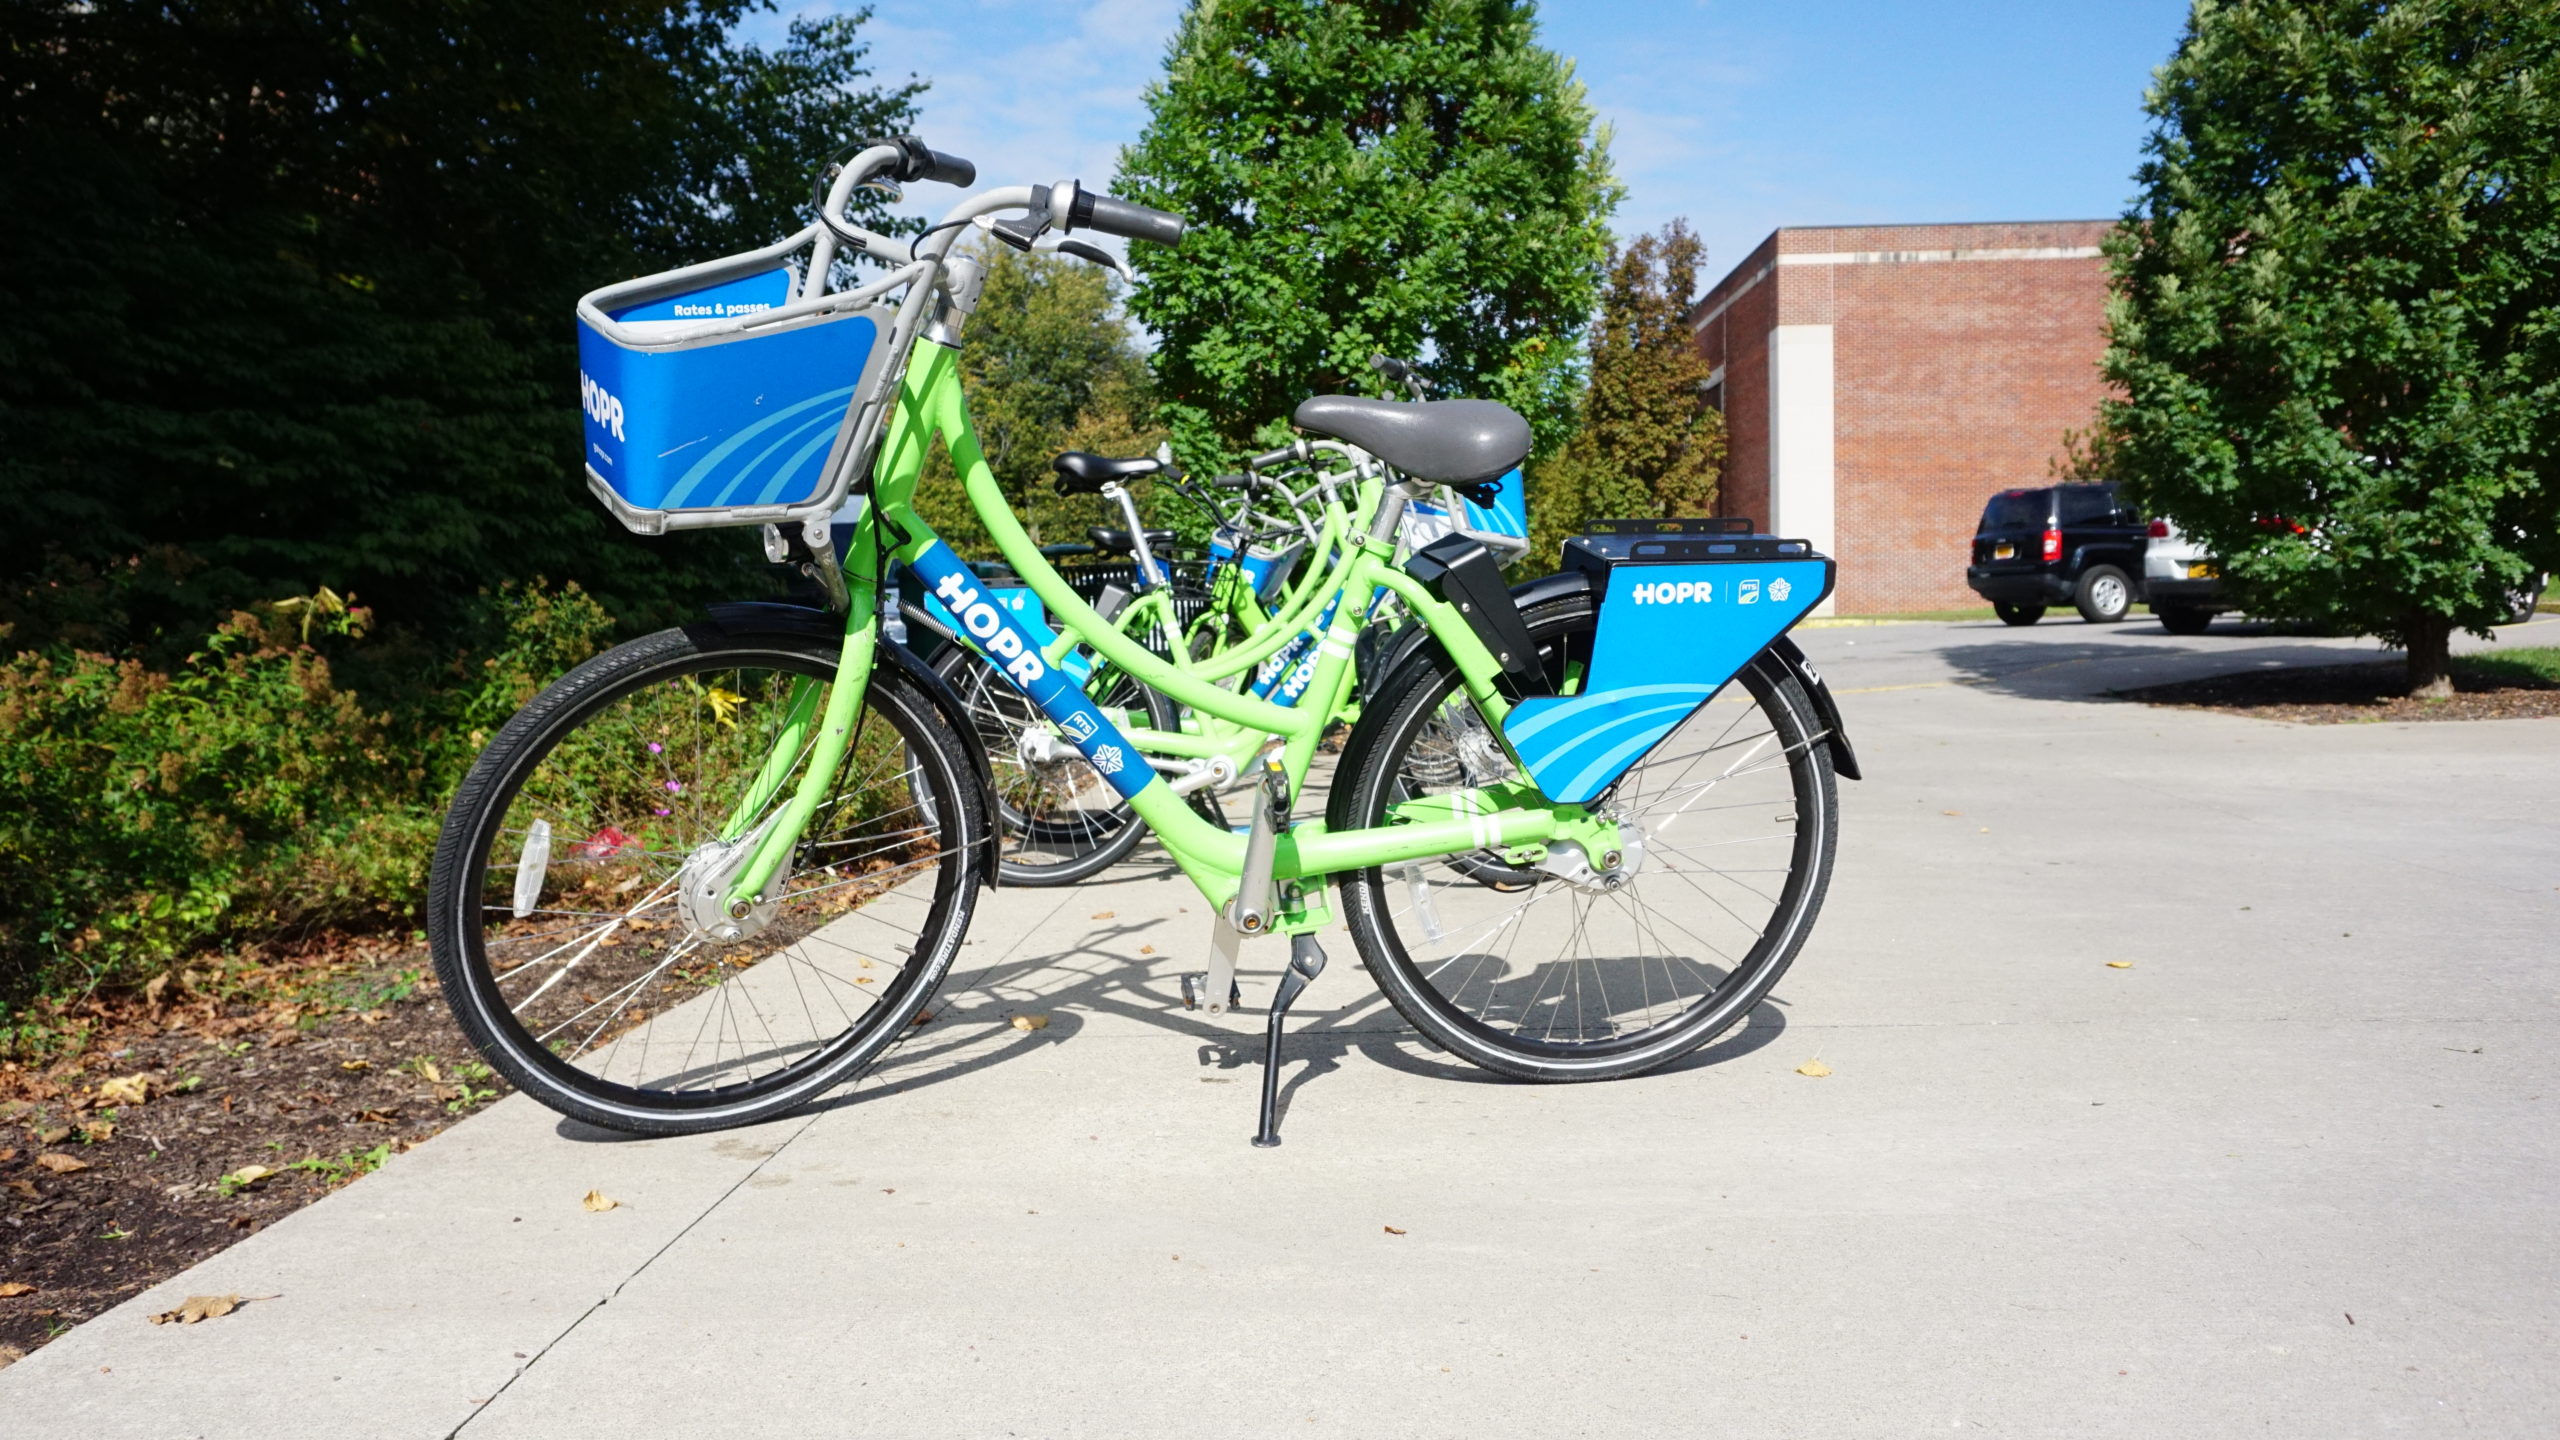 Green and blue HOPR bike parked on University of Rochester campus